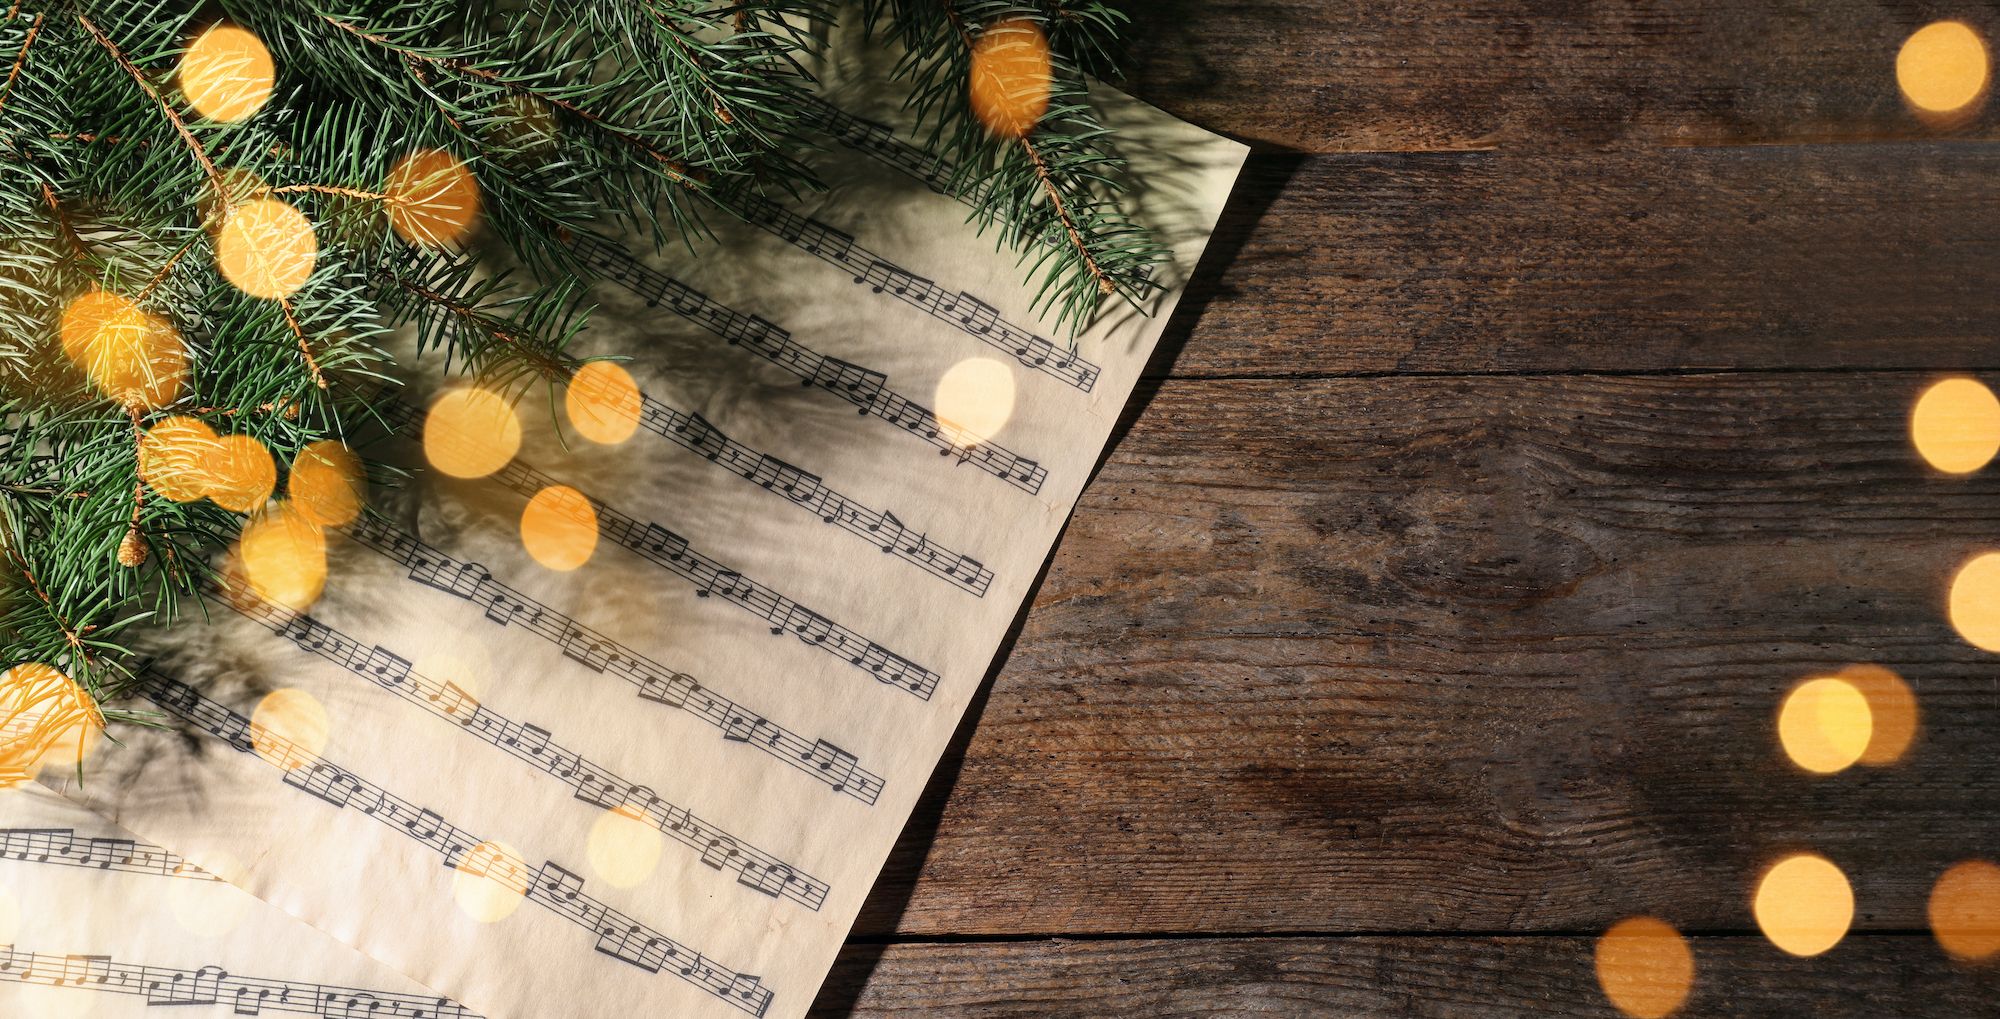 Get into the festive spirit with our collection of background music for Christmas games perfect for 